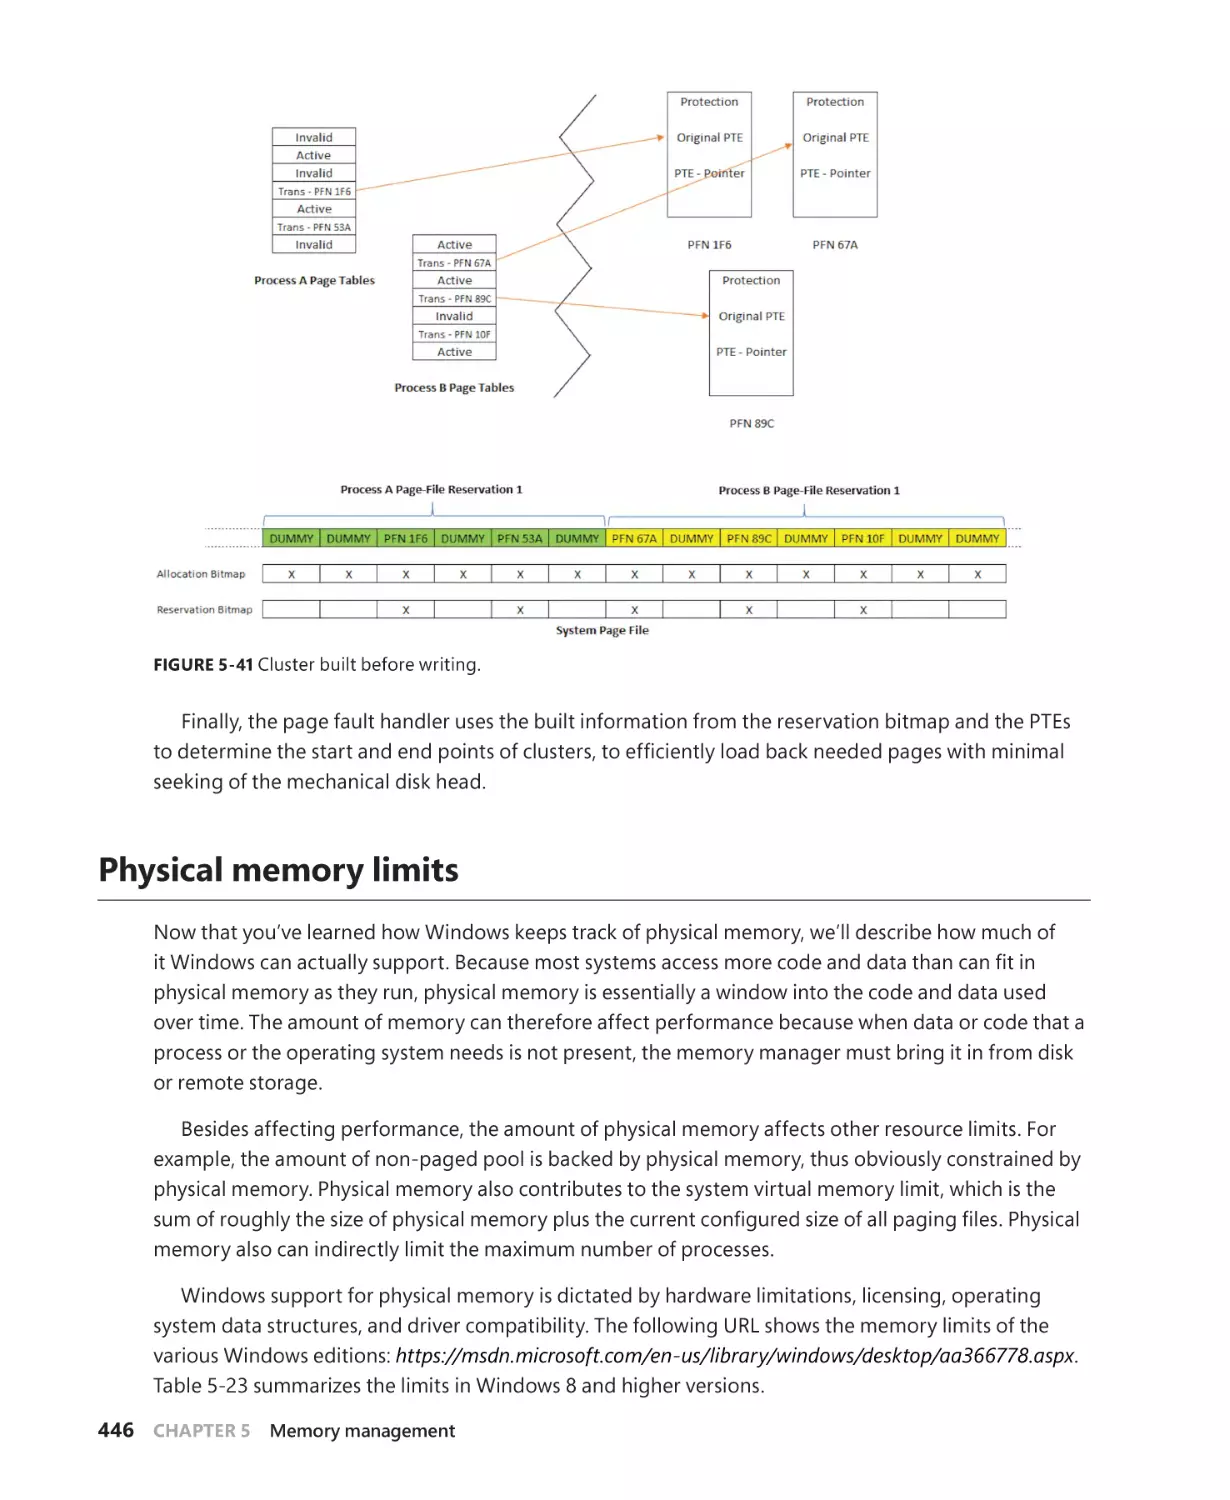 Physical memory limits